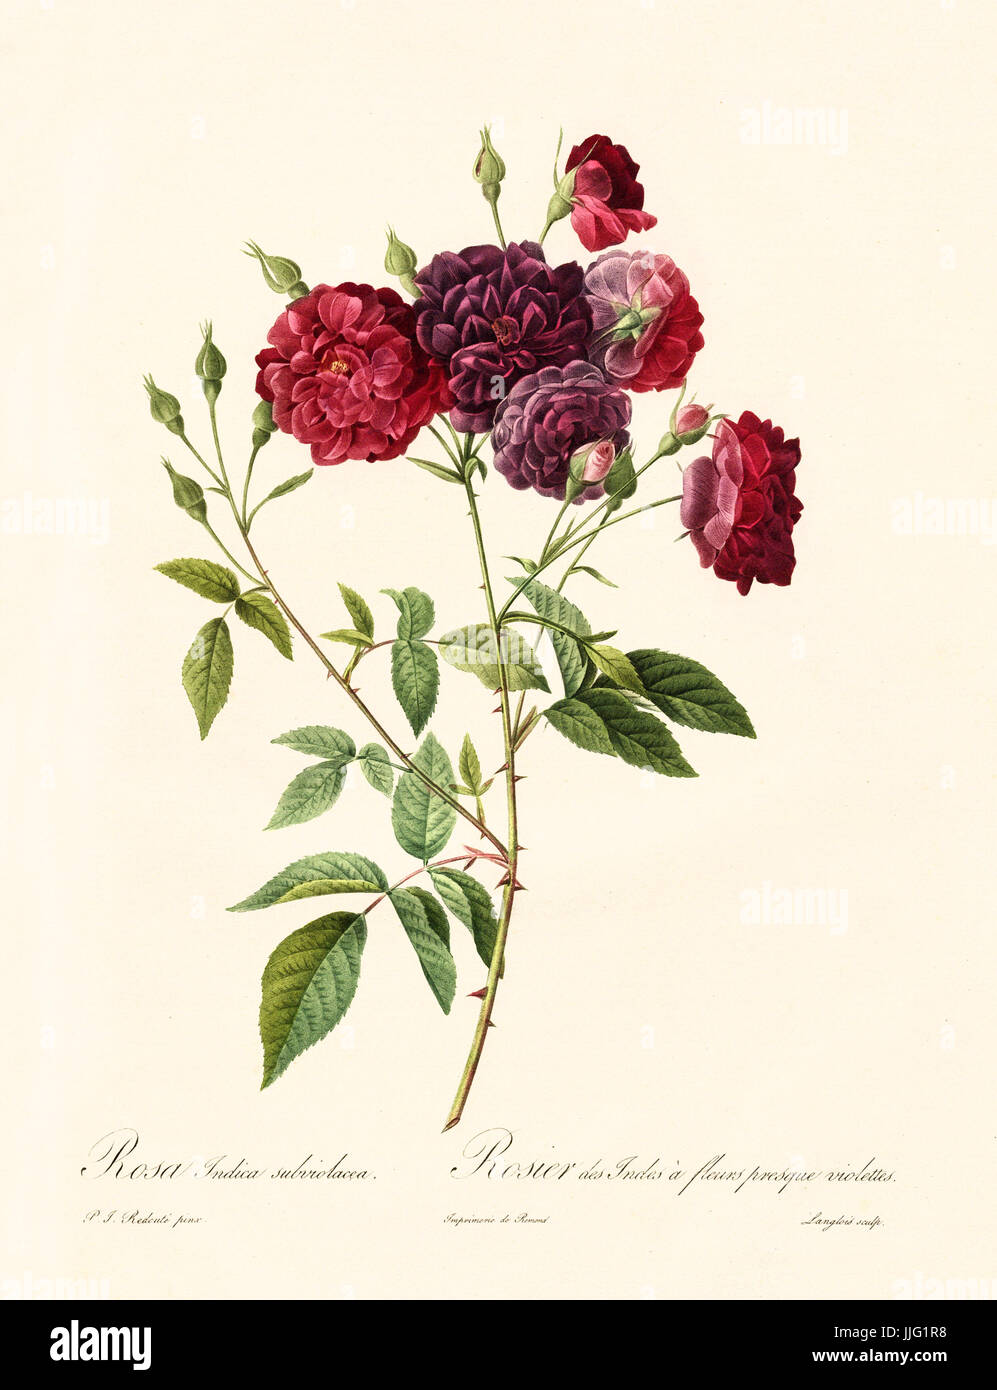 Old illustration of Rosa indica subviolacea. Created by P. R. Redoute, published on Les Roses, Imp. Firmin Didot, Paris, 1817-24 Stock Photo